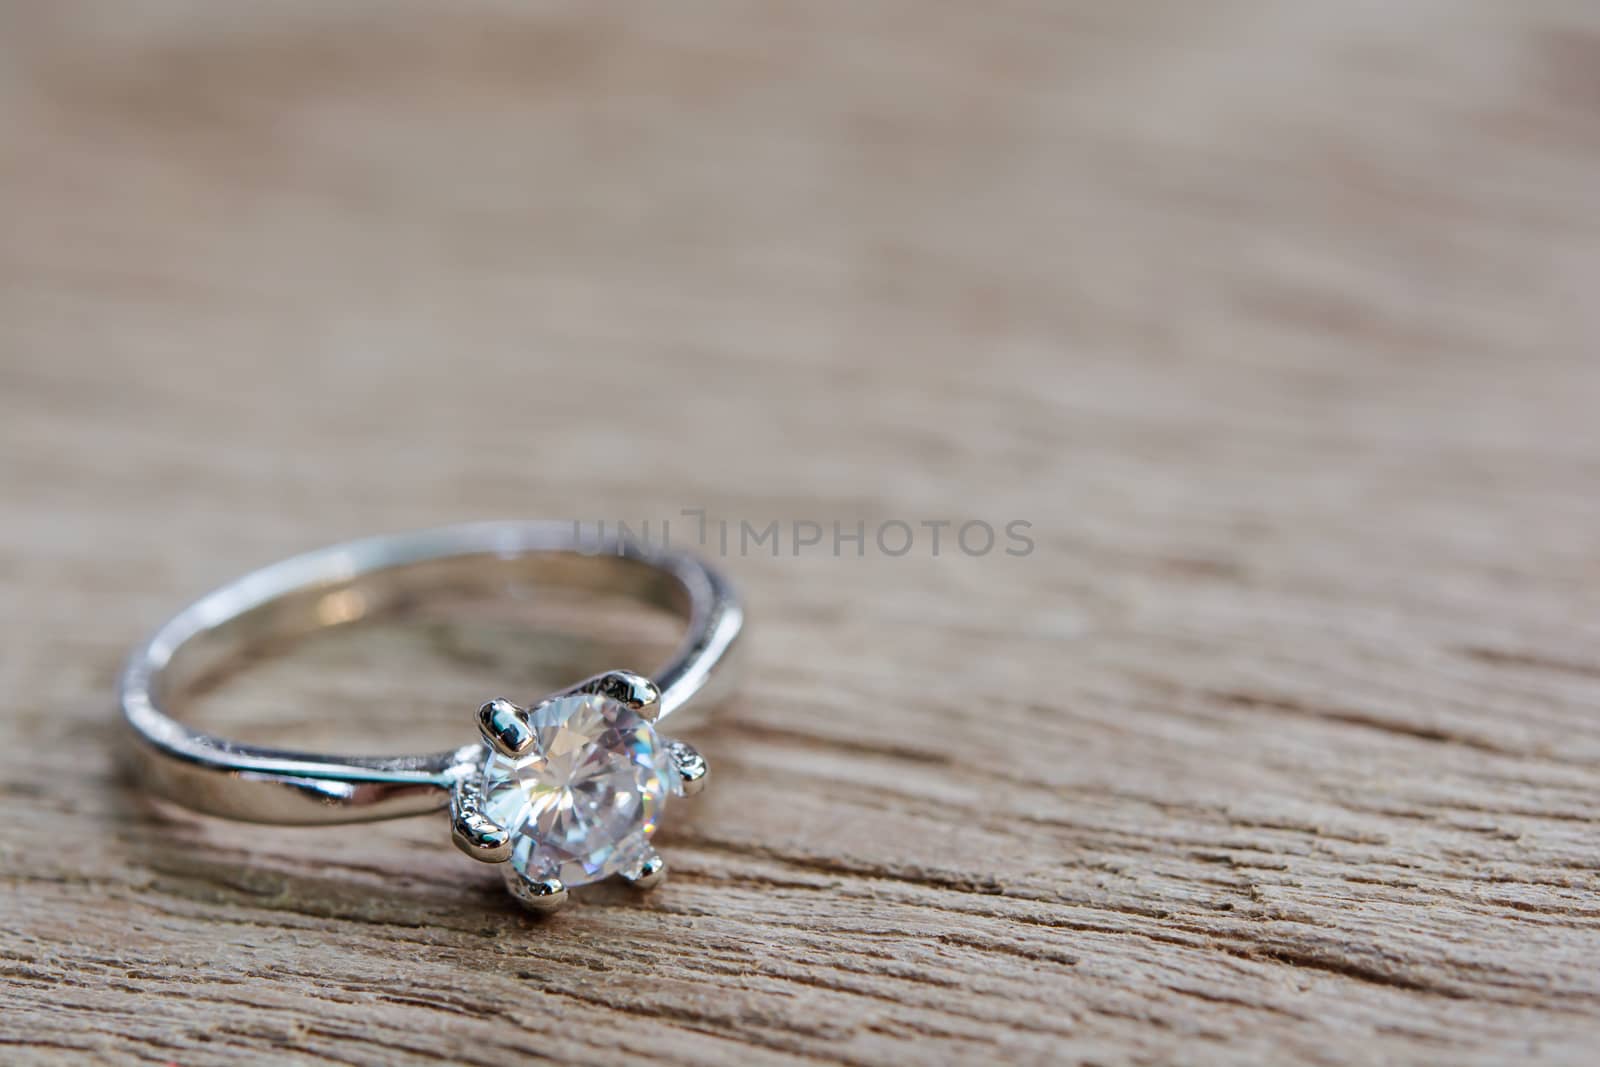 Diamond ring, wedding ring on plank wooden with copy space 
 by sunnygb5